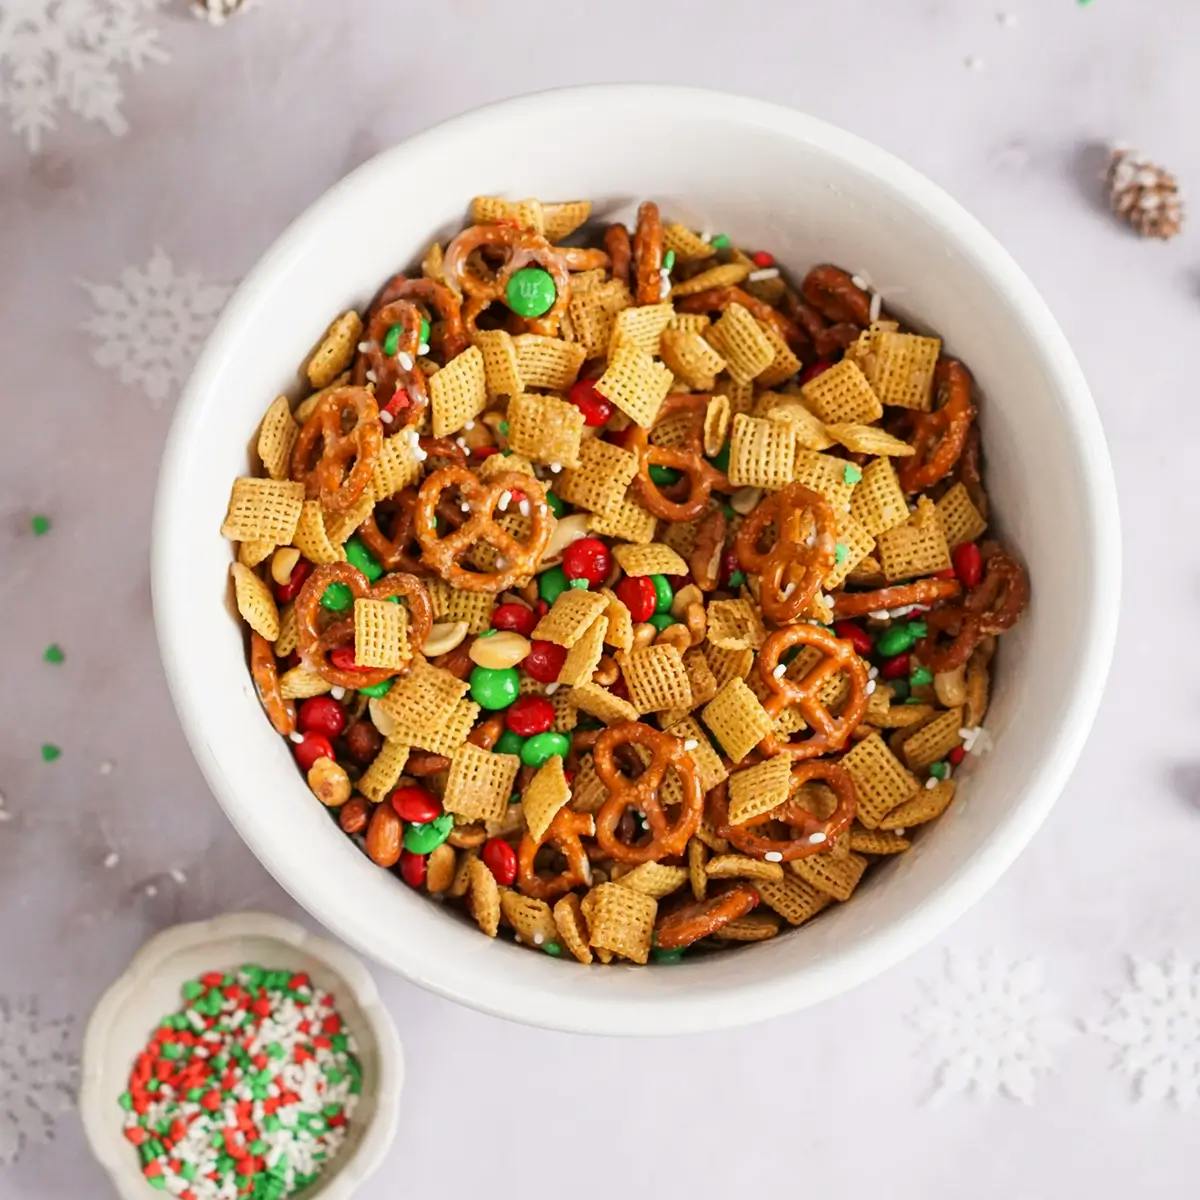 Bowl of chex mix showing a sweet and salted homemade recipe.